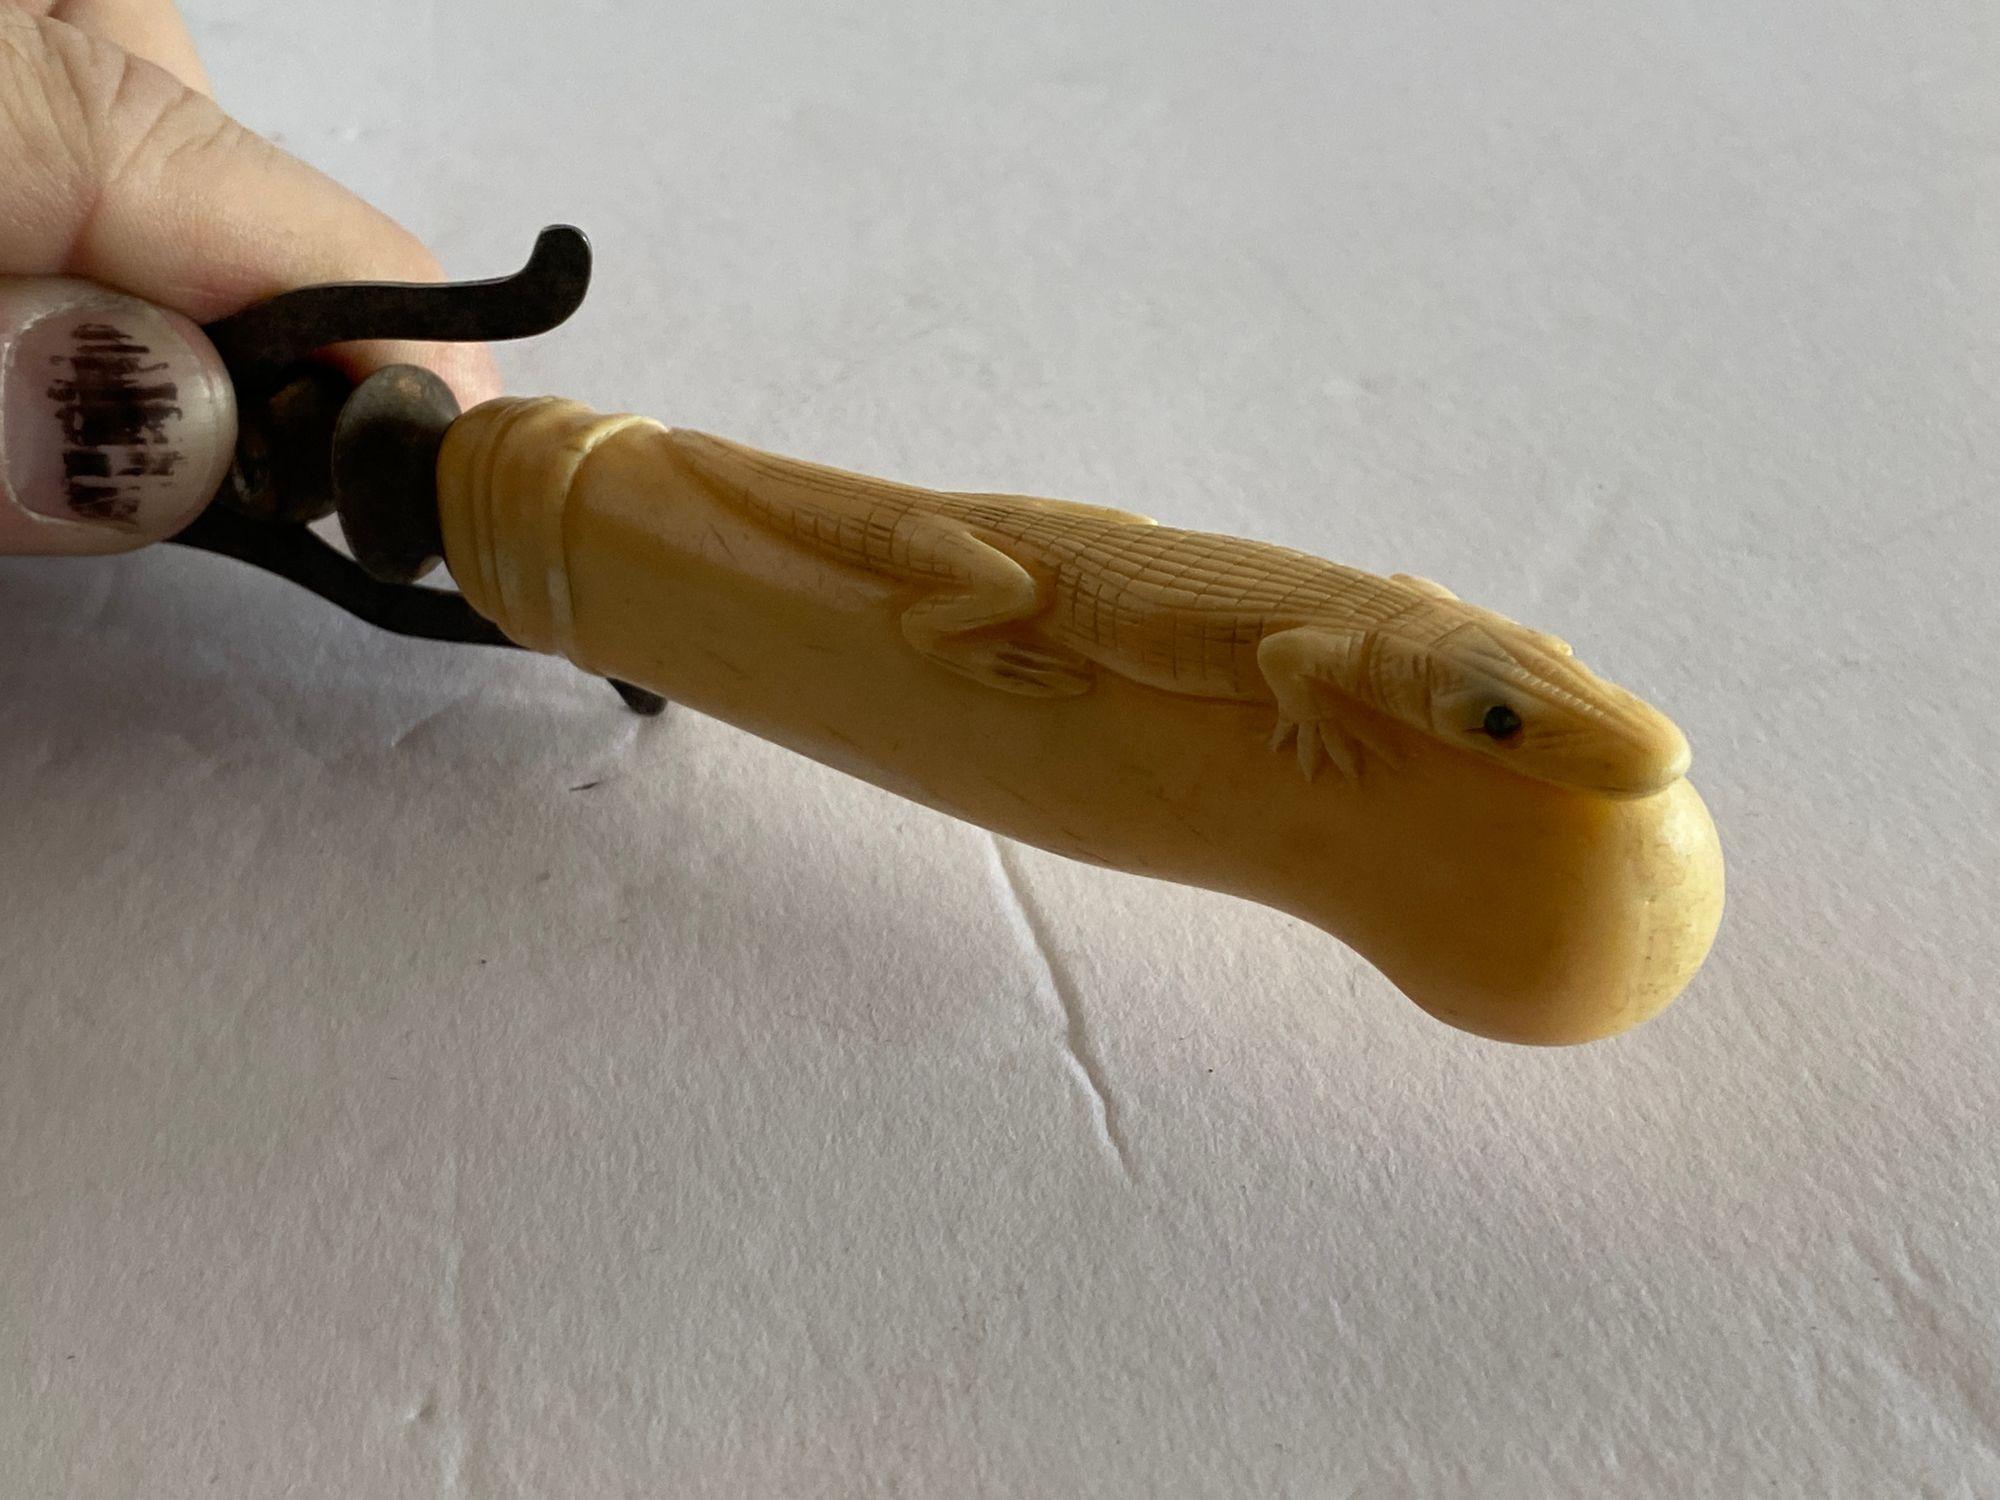 Late 19th Century 19th Century Hand-Carved Bone Alligator Handled Culinary Carving Set For Sale